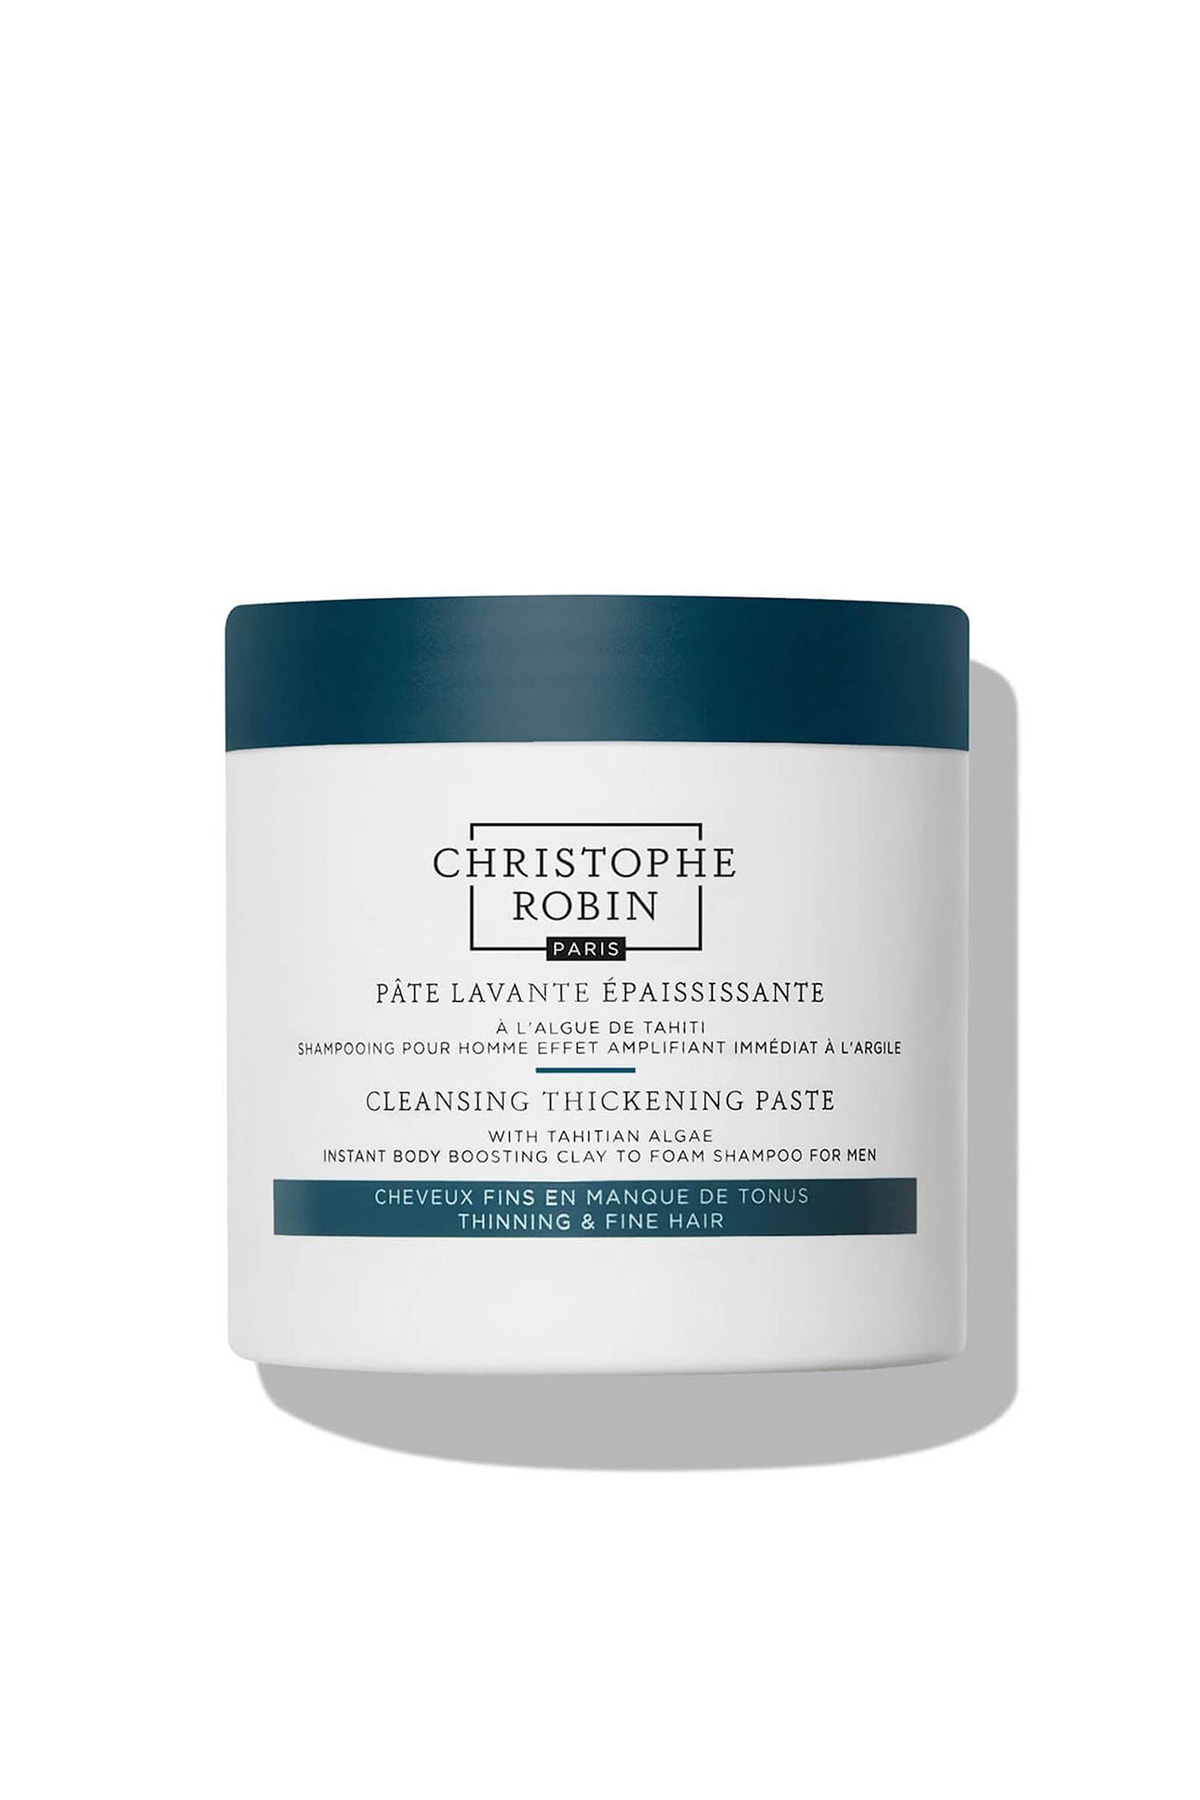 christophe robin Cleansing Thickening Paste With Tahitian Algae - 250 Ml